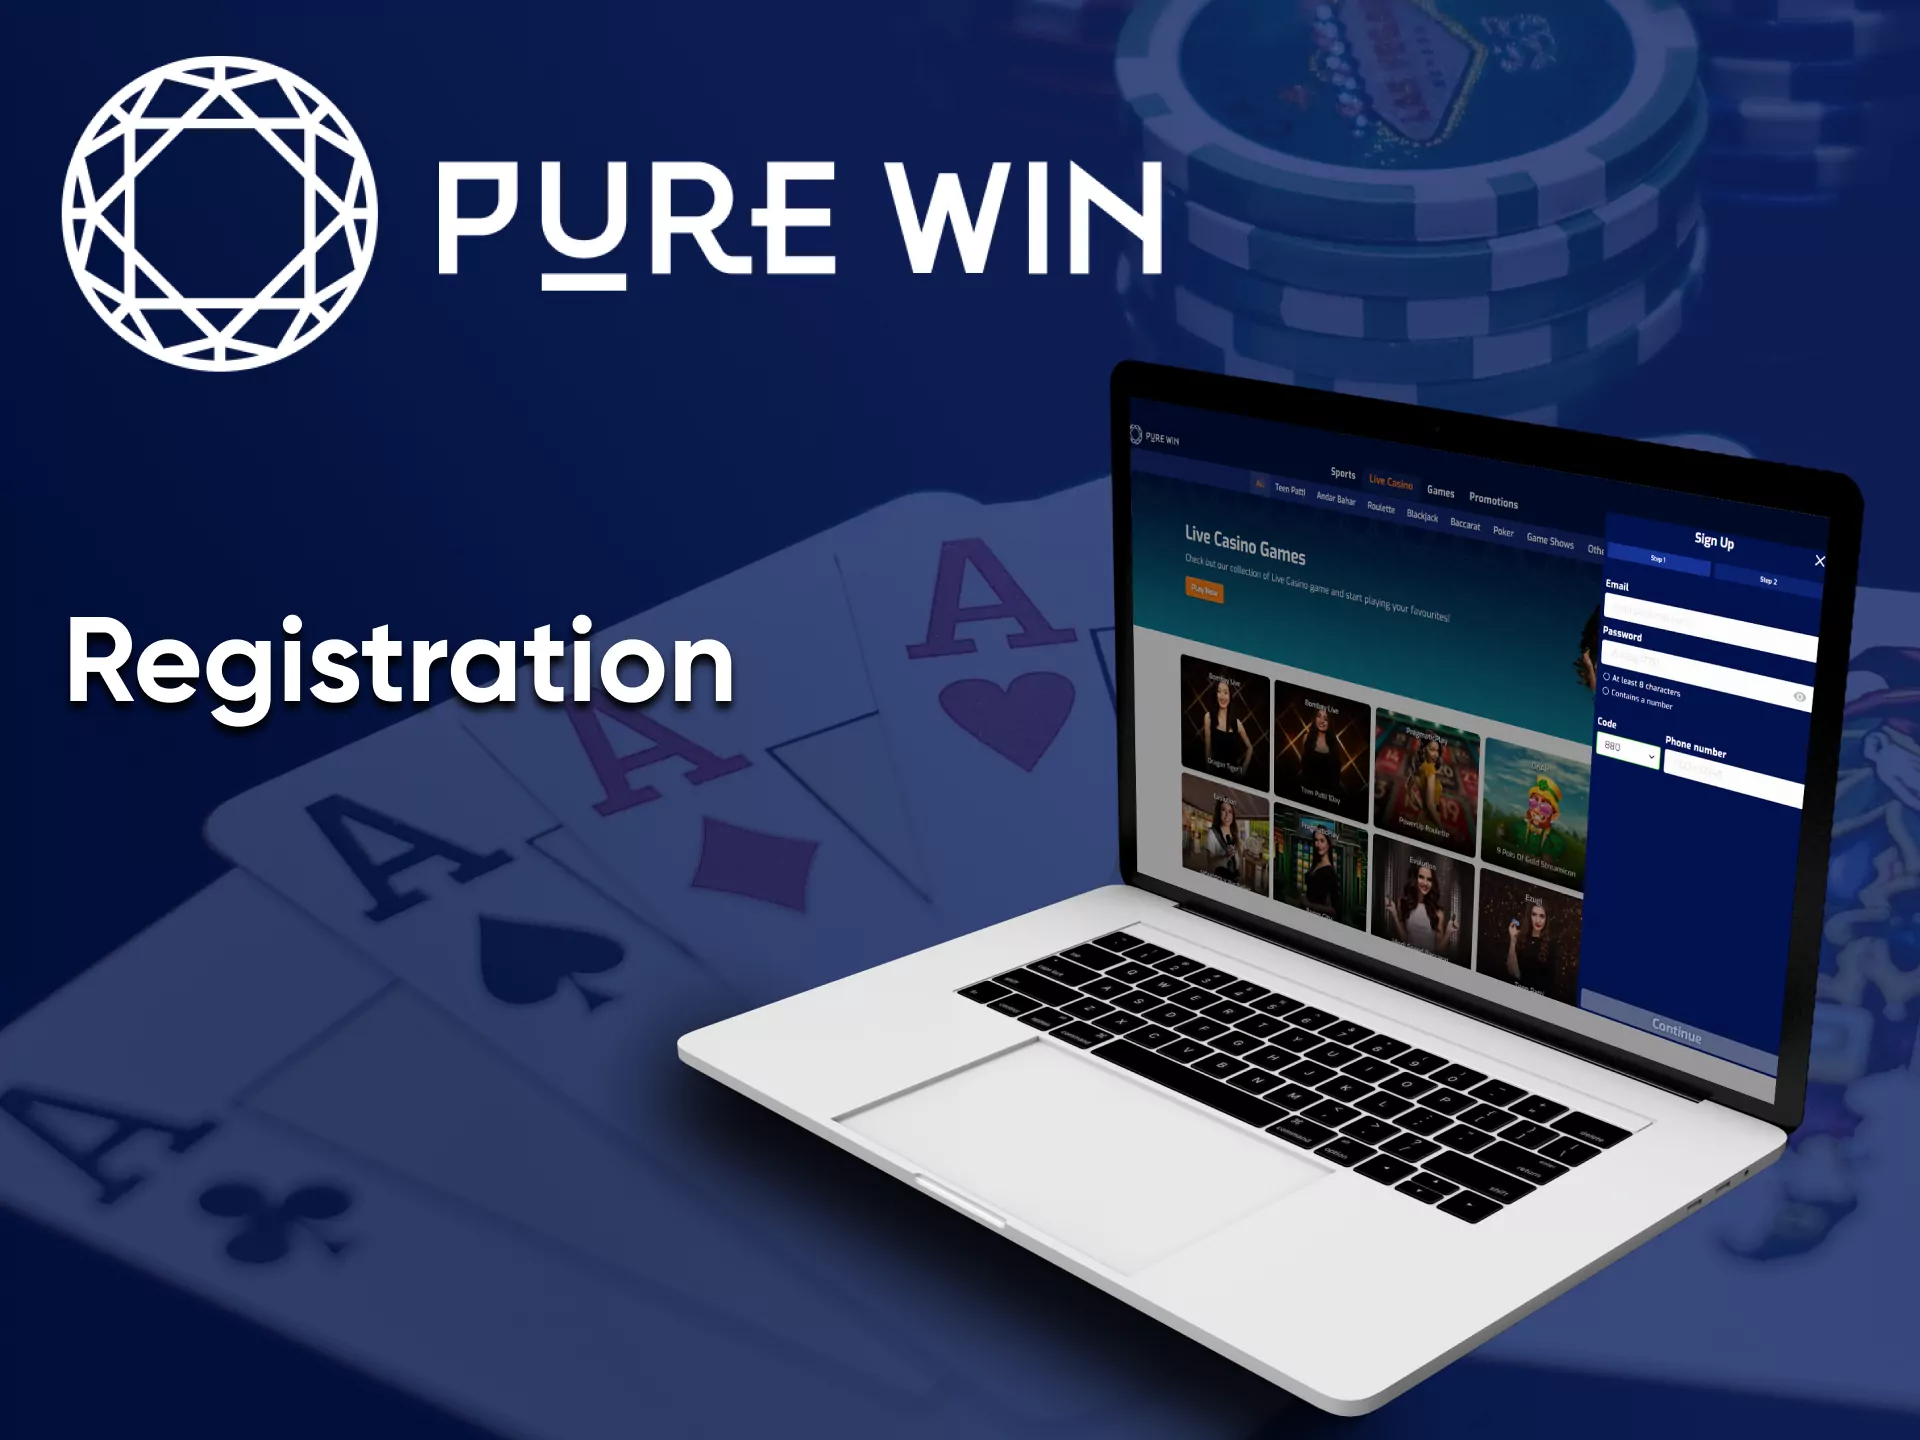 Create an account for casino games from Pure Win.